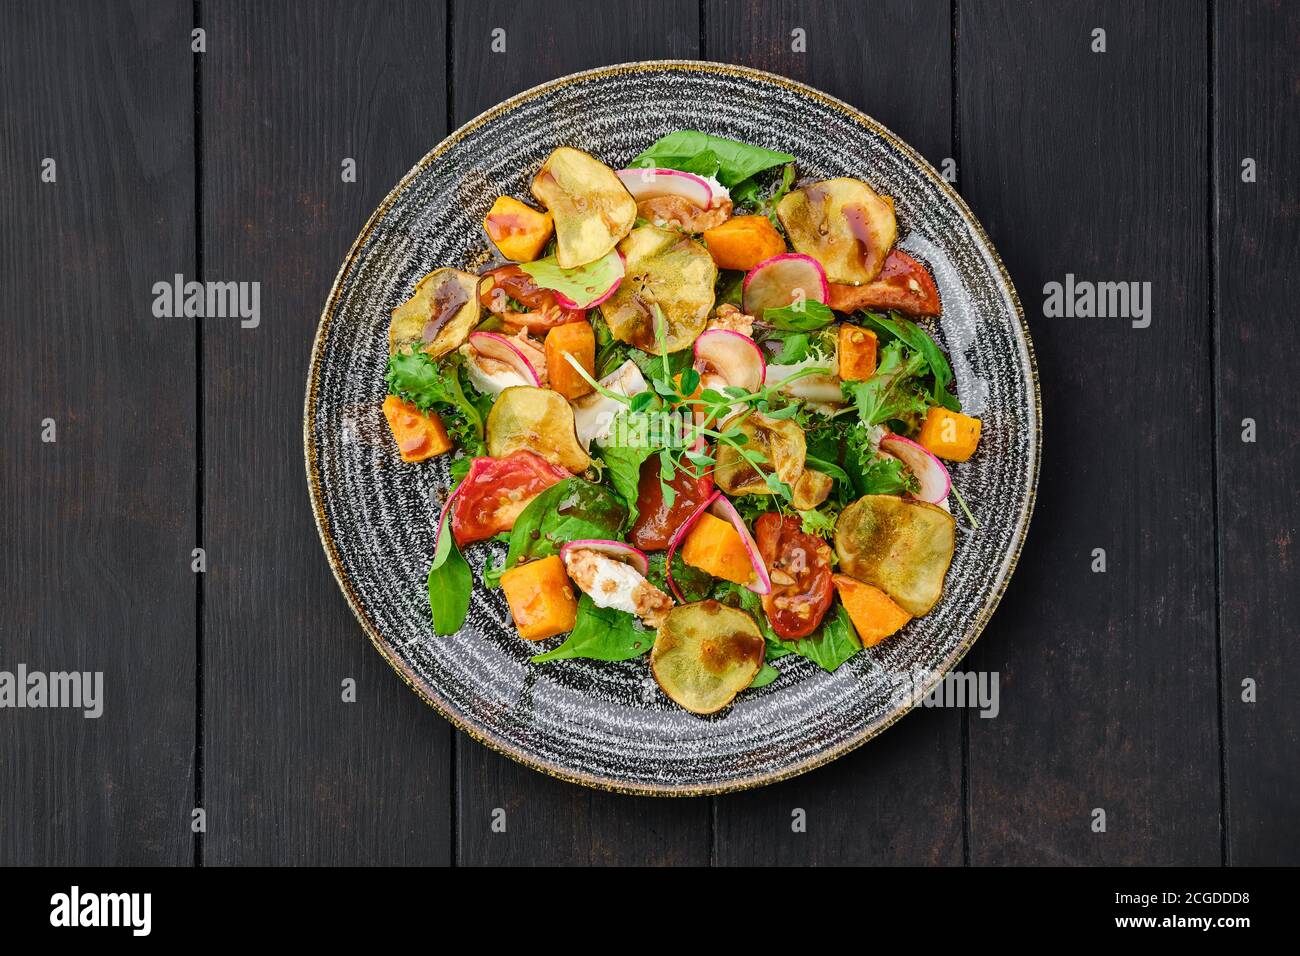 Top view of salad with soft cheese, radish, pear, pumpkin and sun dried tomato Stock Photo